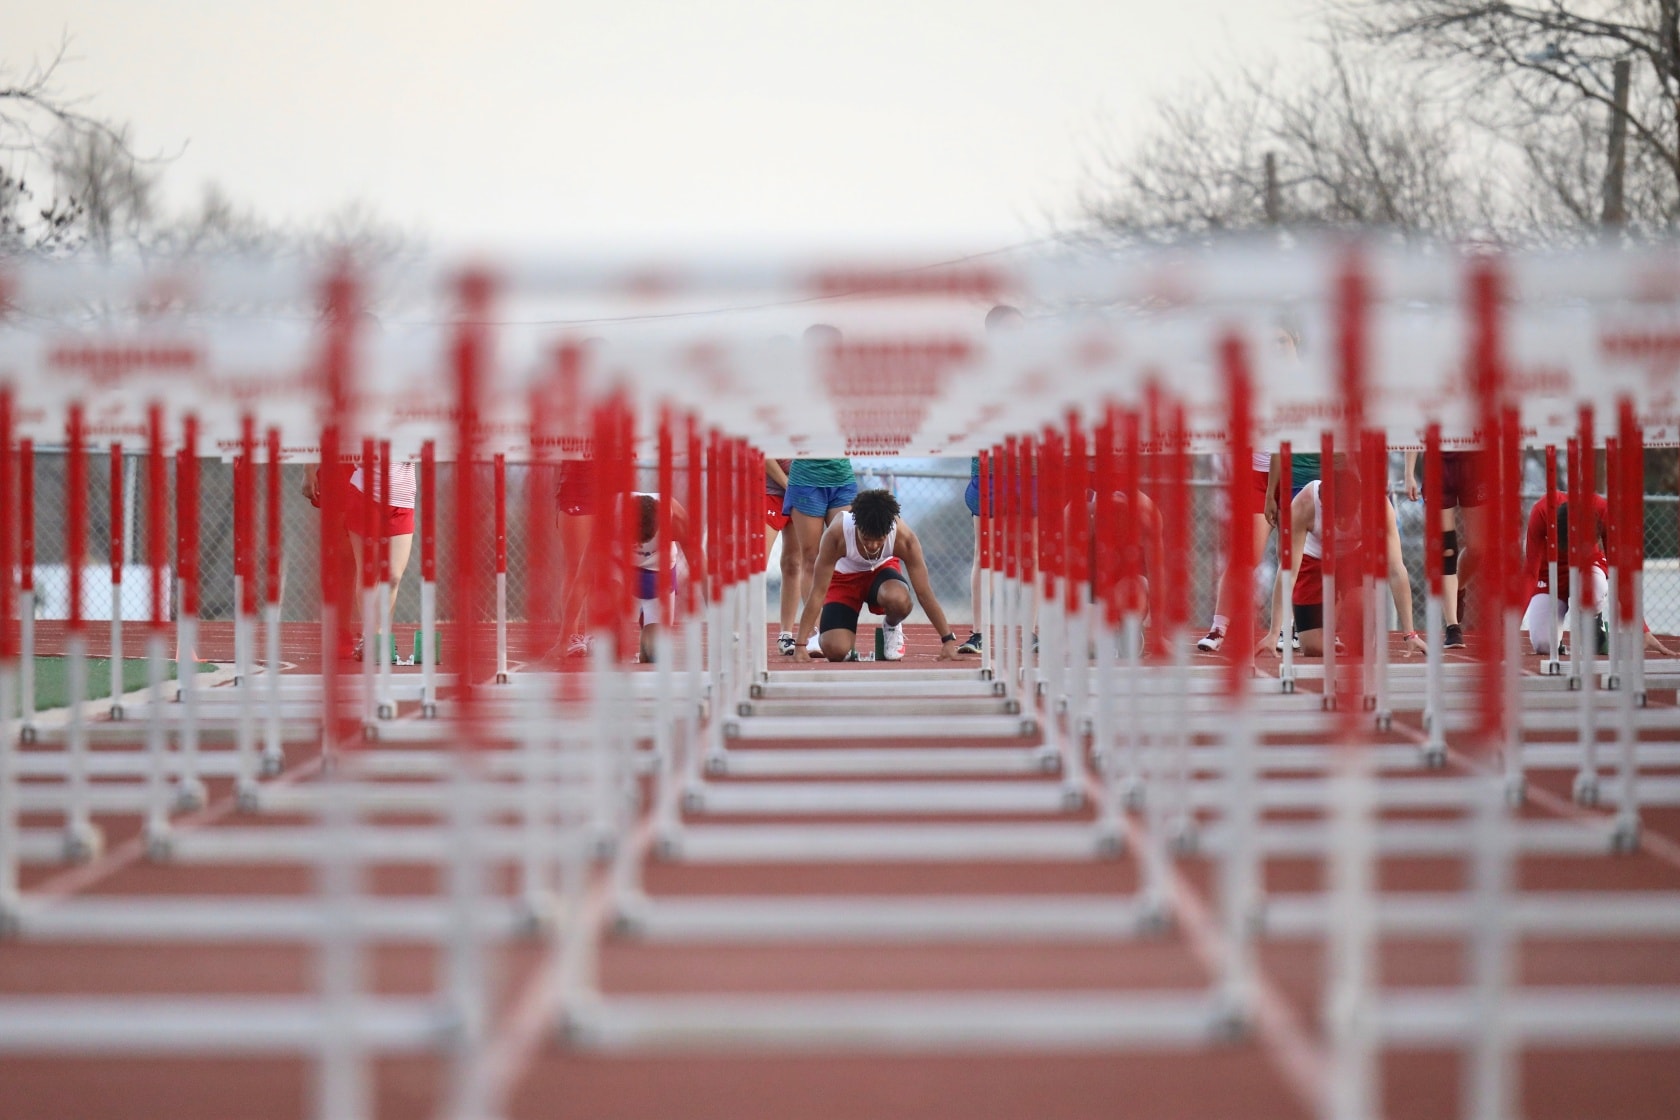 Rows of hurdles with a track athlete about to run a race